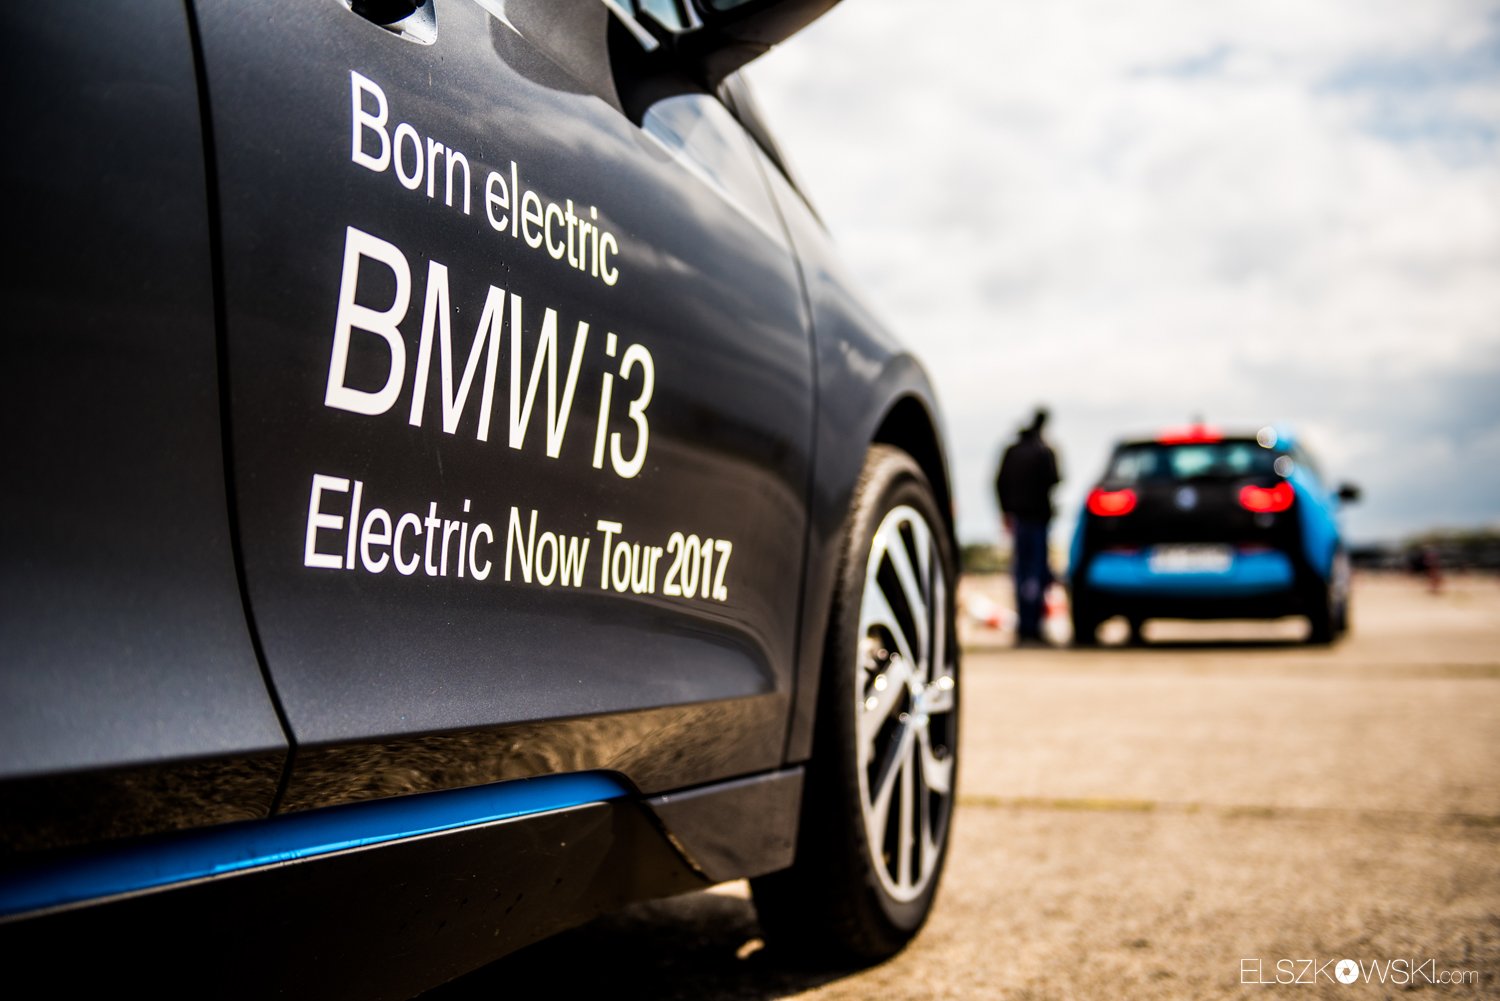 BMW iPerformance Electric Now Tour 2017